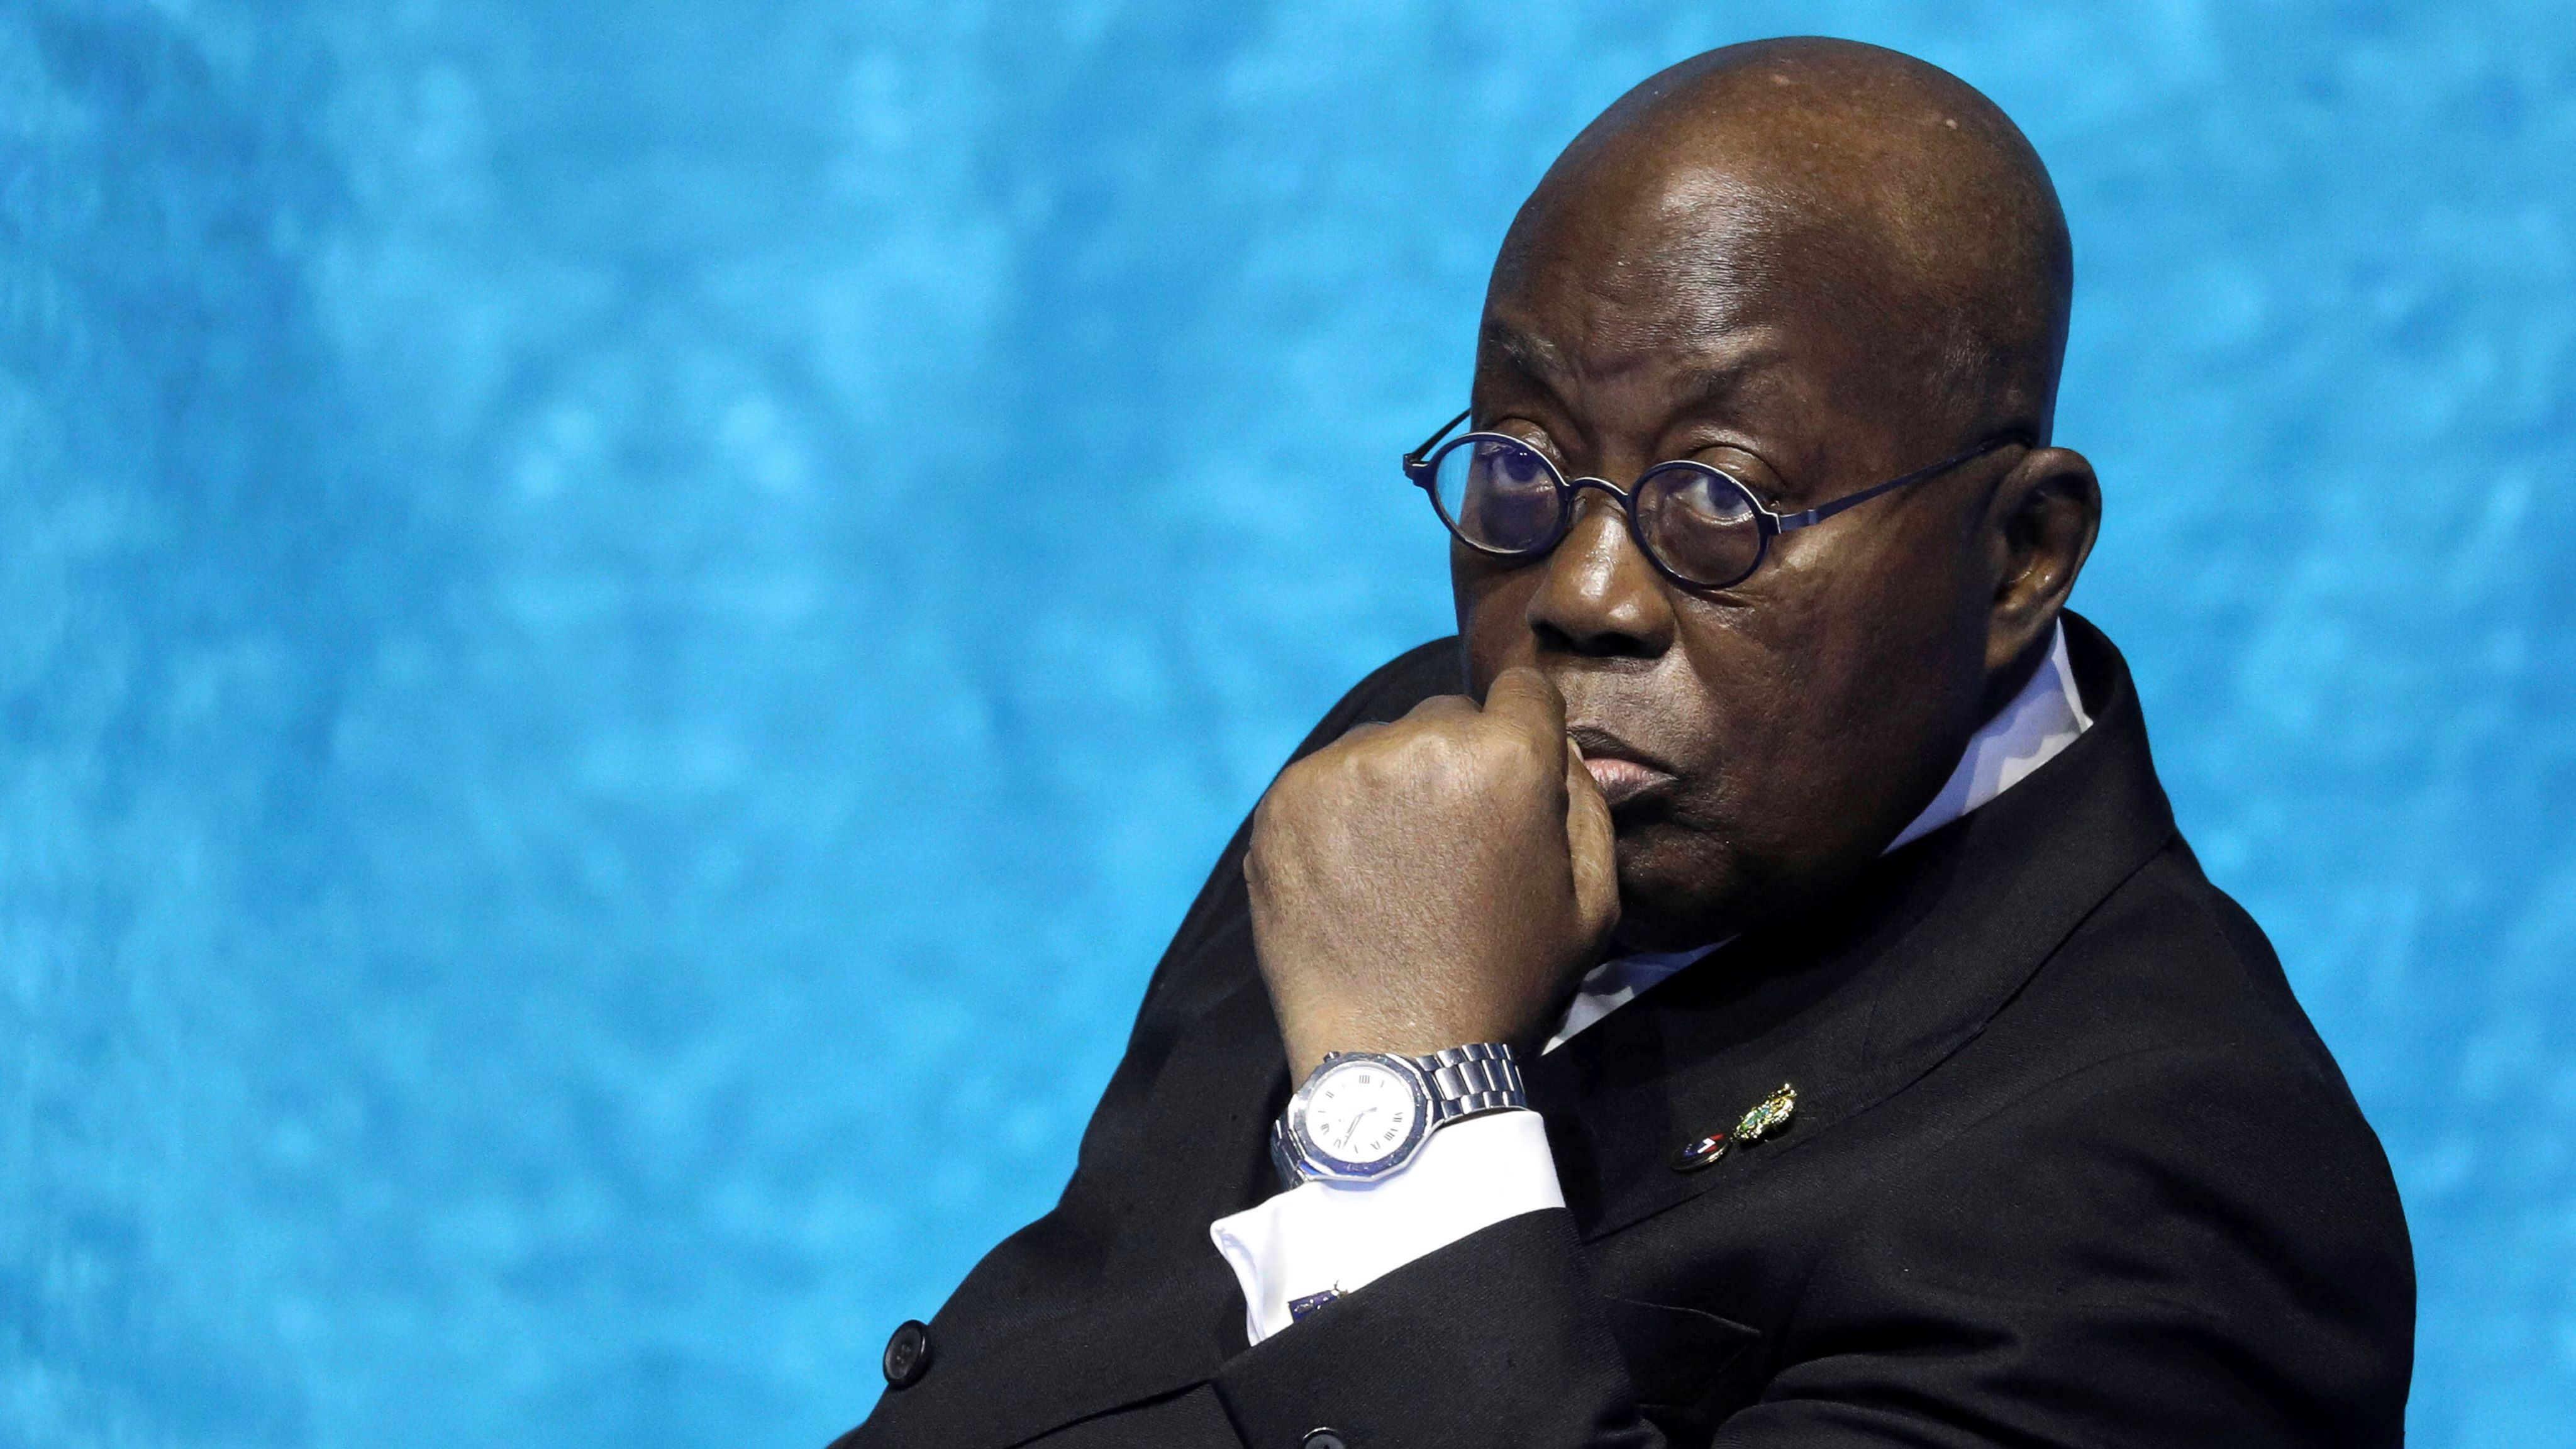 Ghana’s Economic Crisis Forces AkufoAddo’s Hand on IMF Bailout WPR